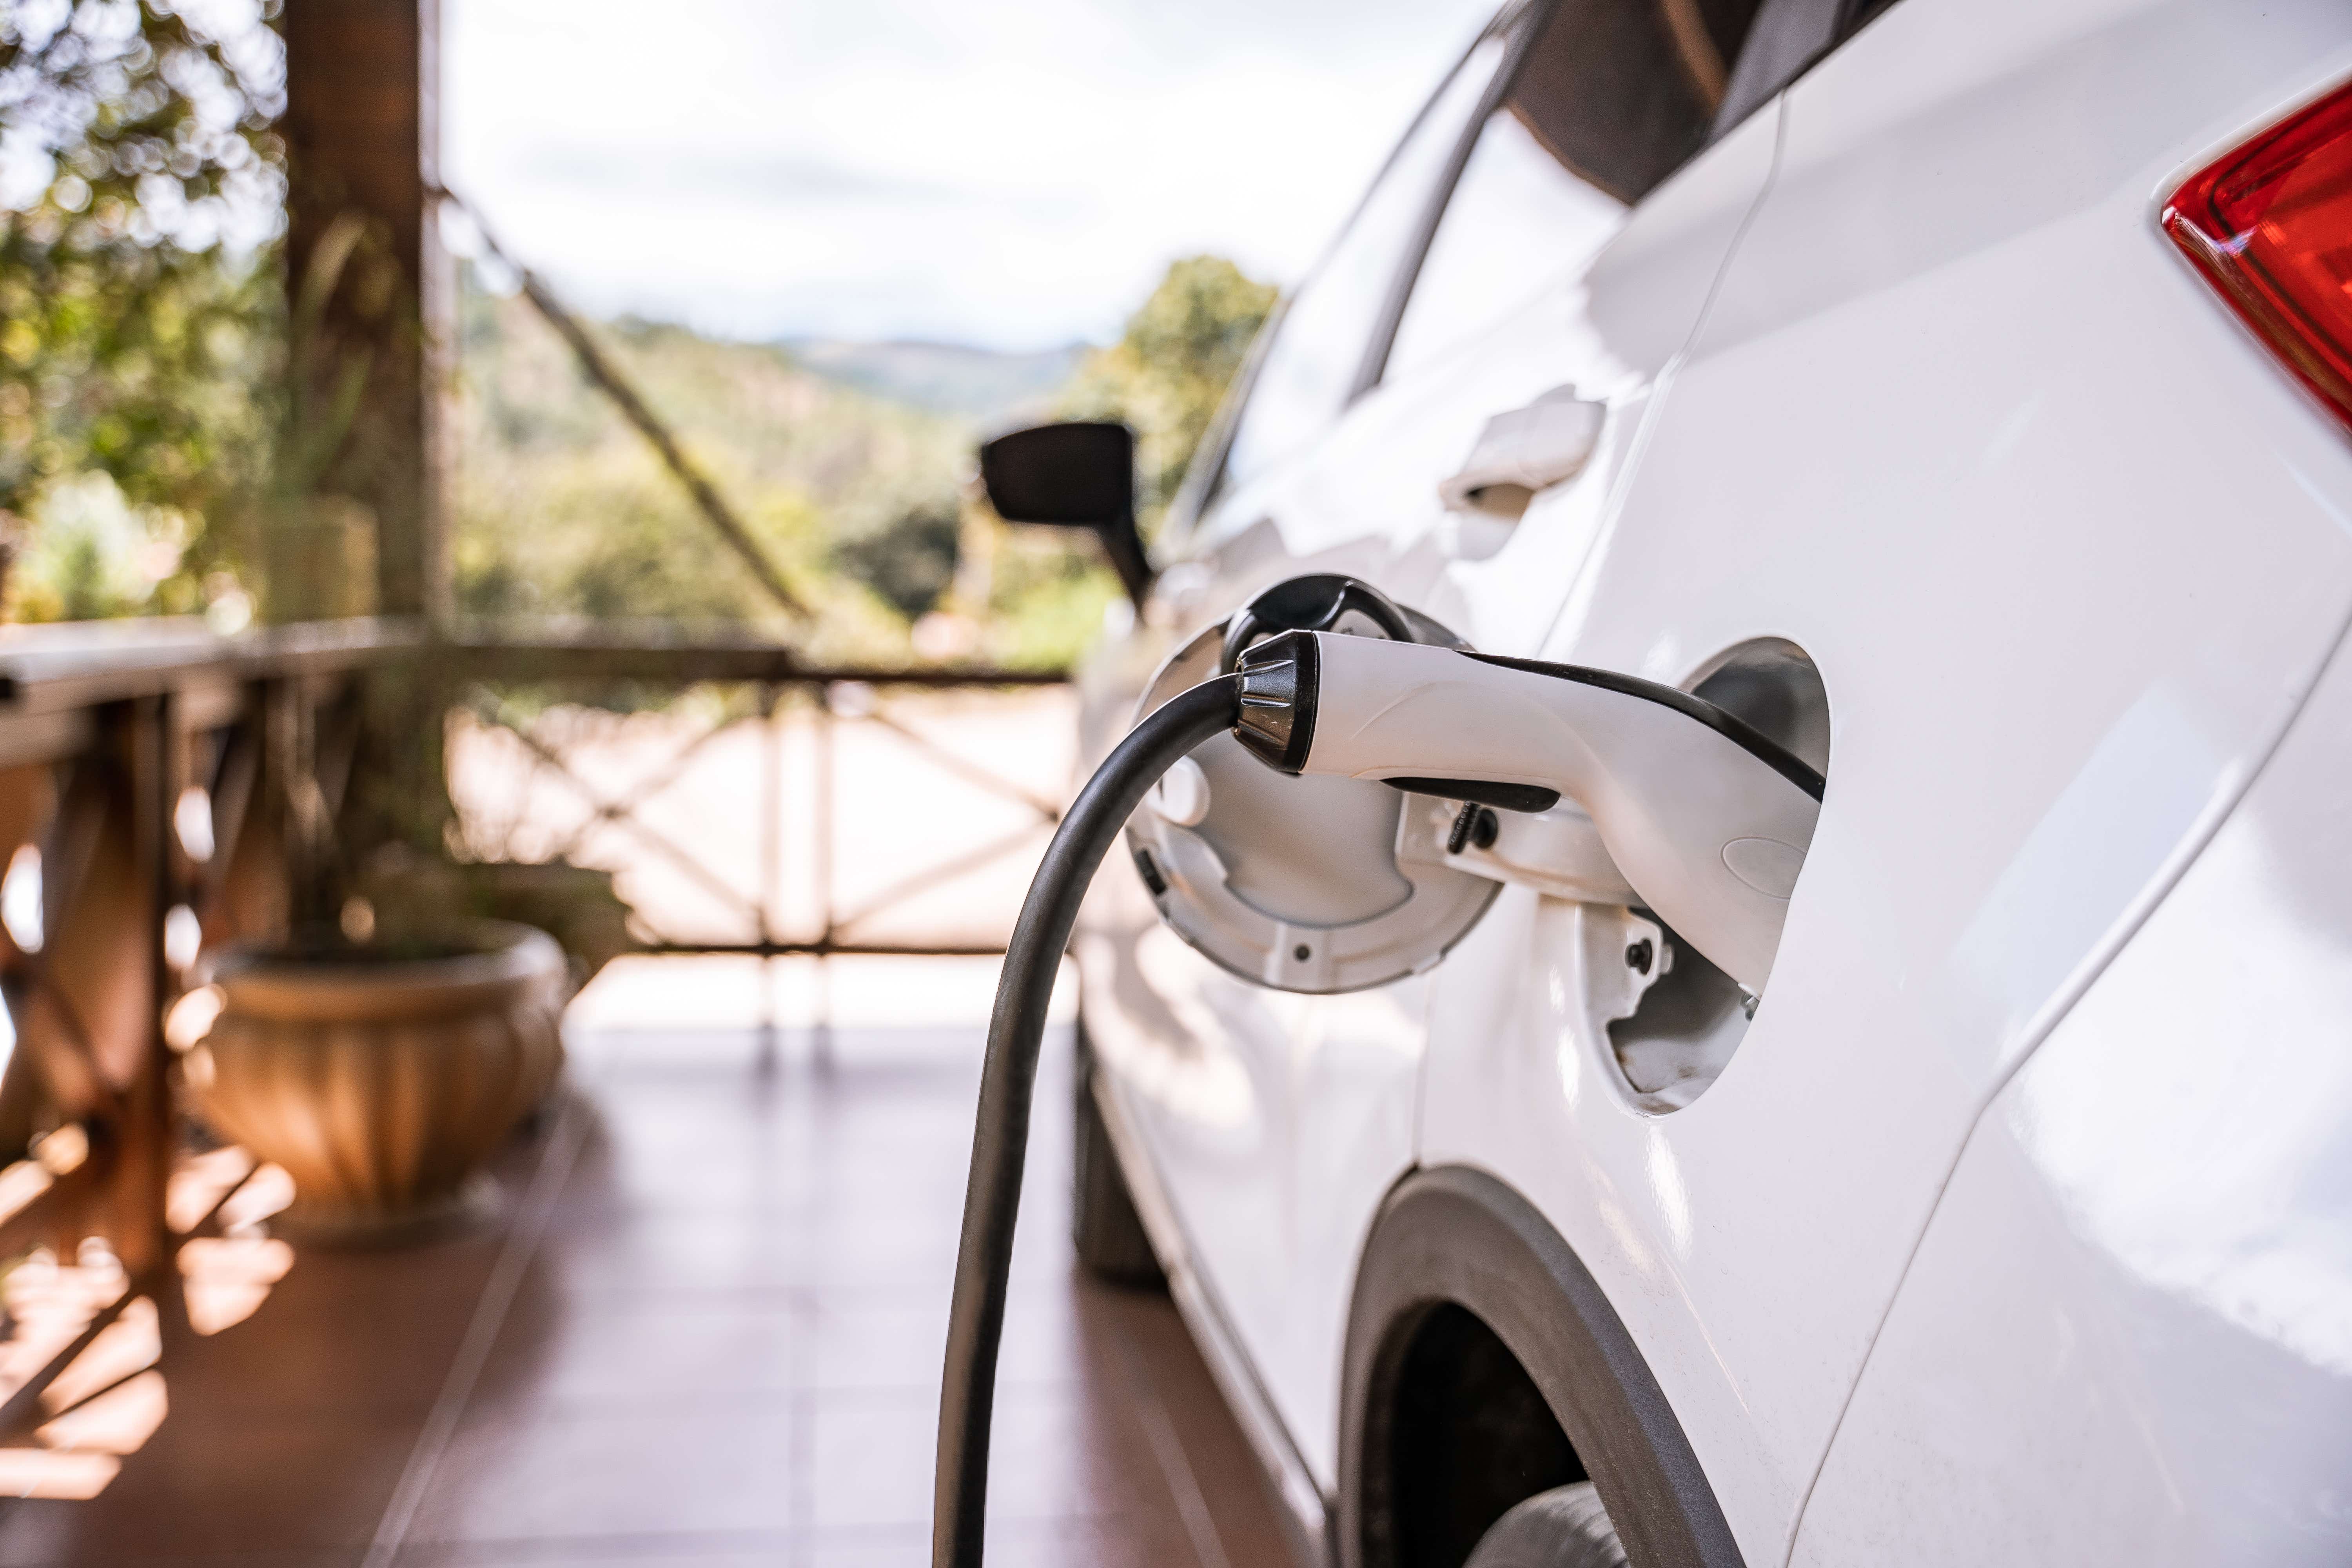 EV charging and home electric vehicle charger installation - Uswitch